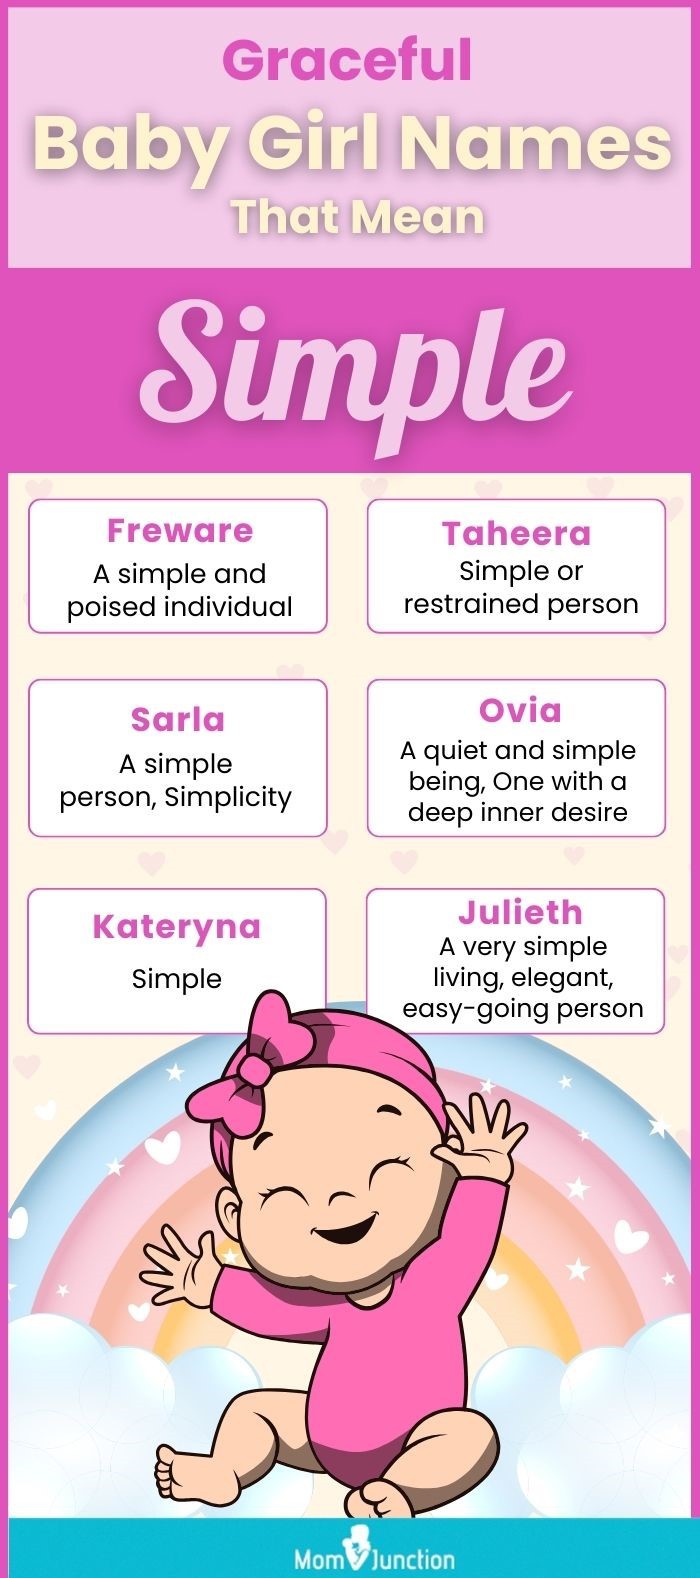 Graceful Baby Girl Names That Mean Simple (infographic) 